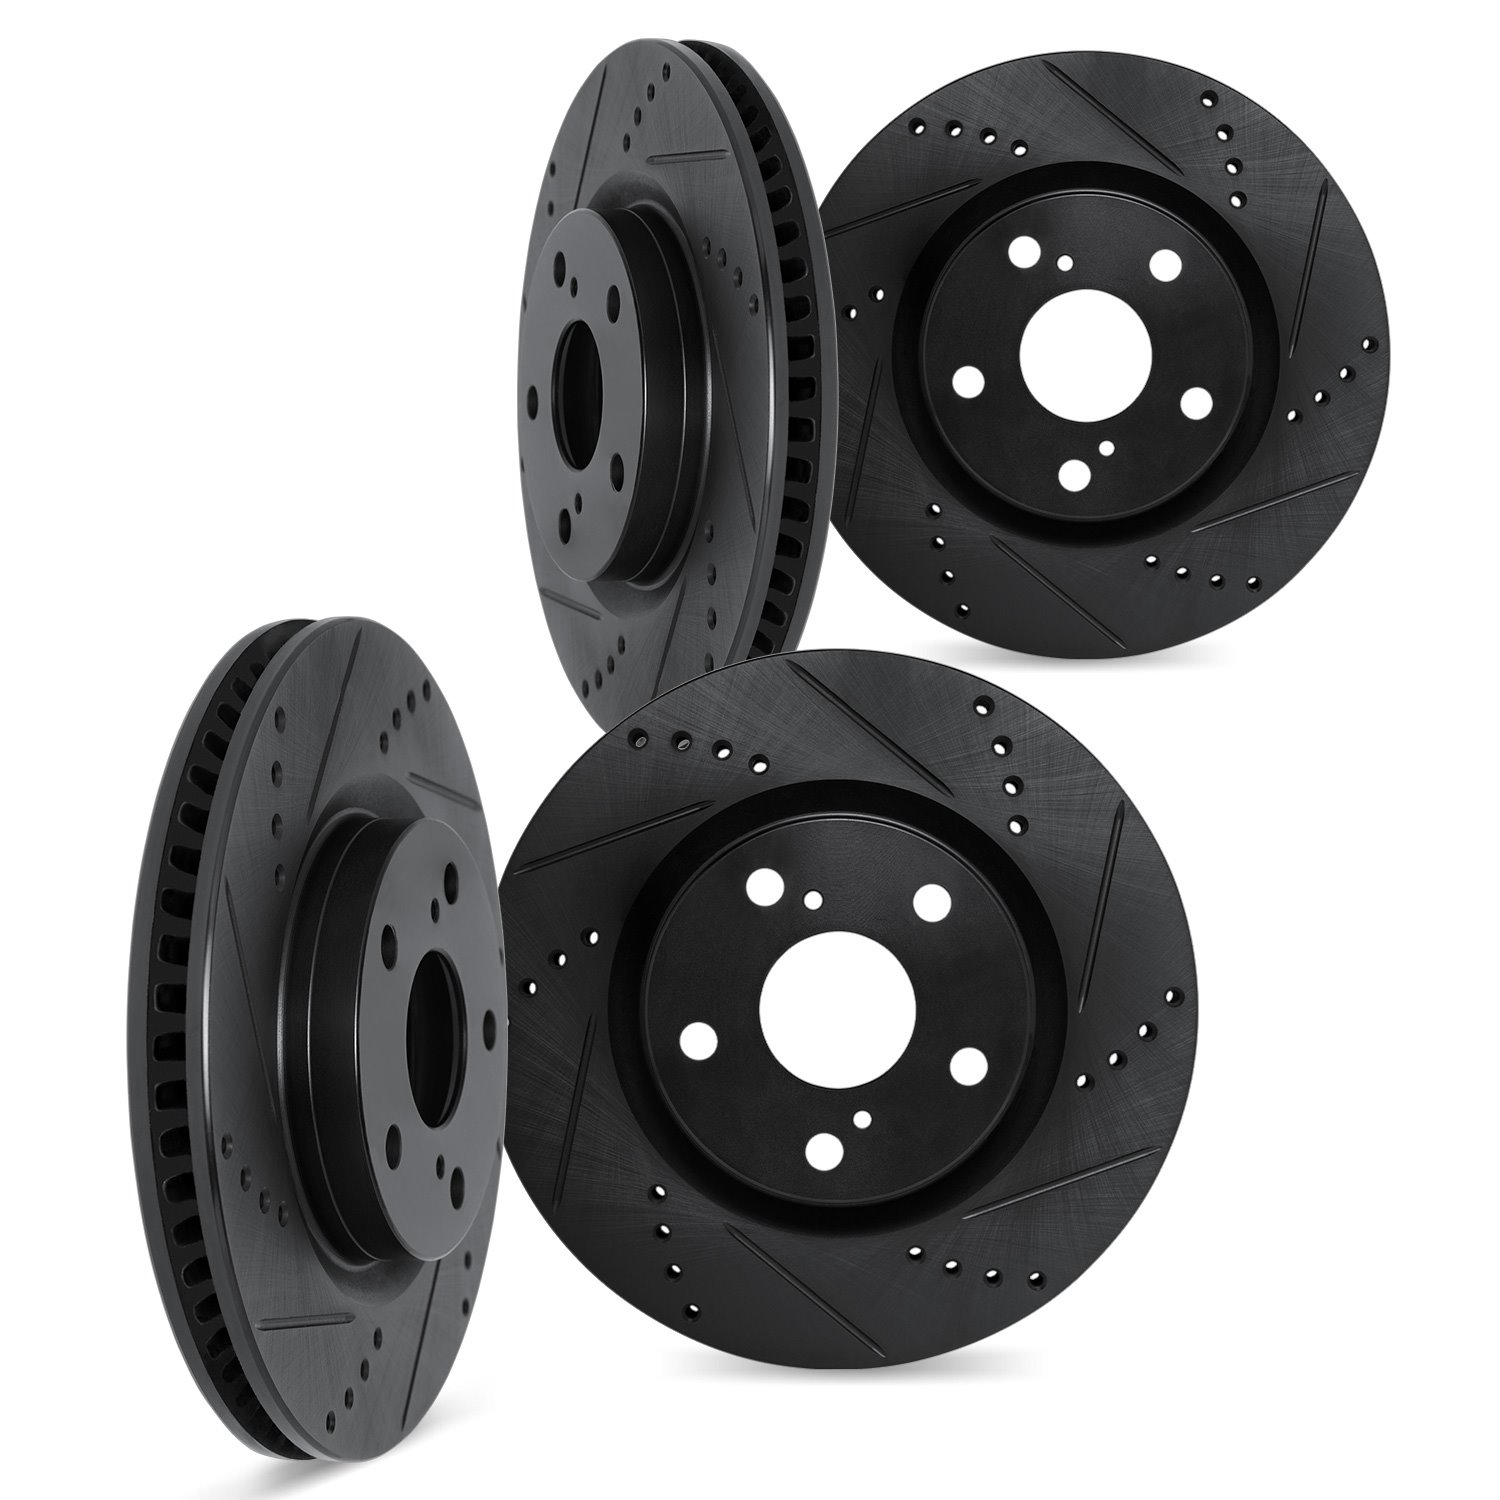 8004-31080 Drilled/Slotted Brake Rotors [Black], 2001-2006 BMW, Position: Front and Rear